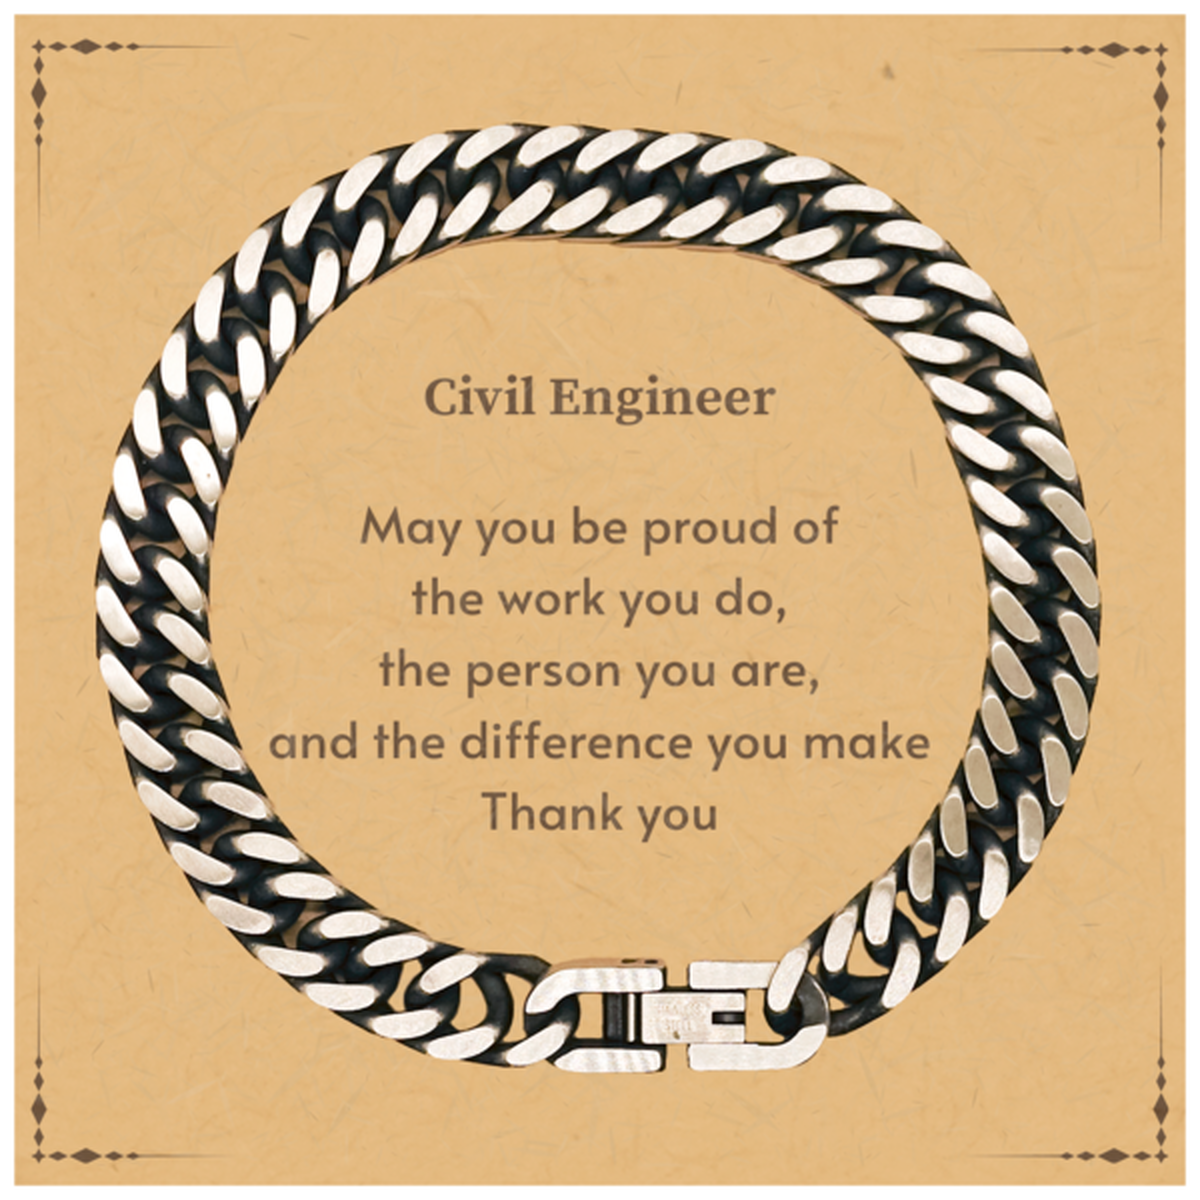 Heartwarming Cuban Link Chain Bracelet Retirement Coworkers Gifts for Civil Engineer, Civil Engineer May You be proud of the work you do, the person you are Gifts for Boss Men Women Friends